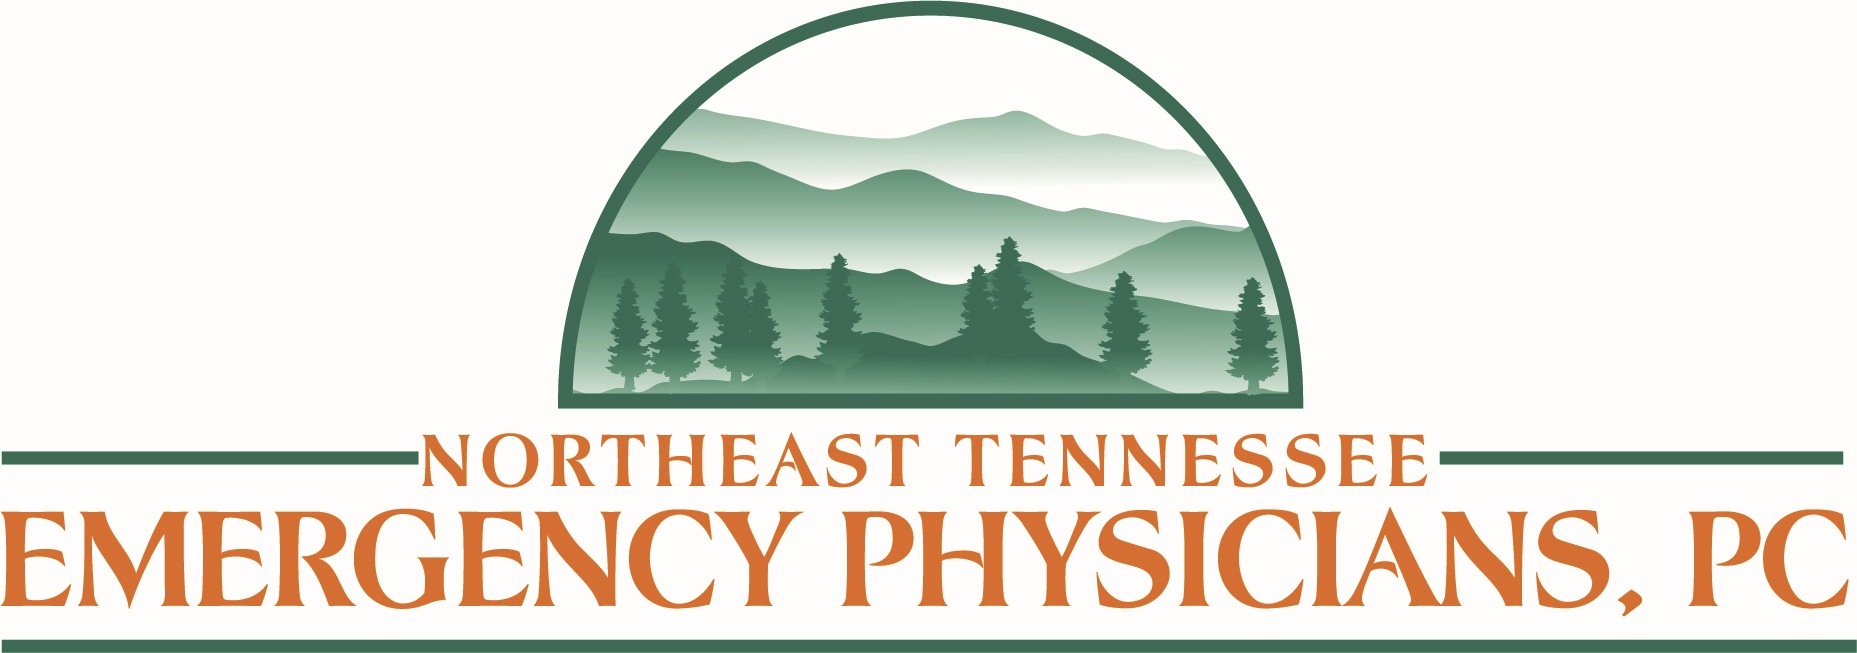 northeast tennessee emergency physicians, pc logo